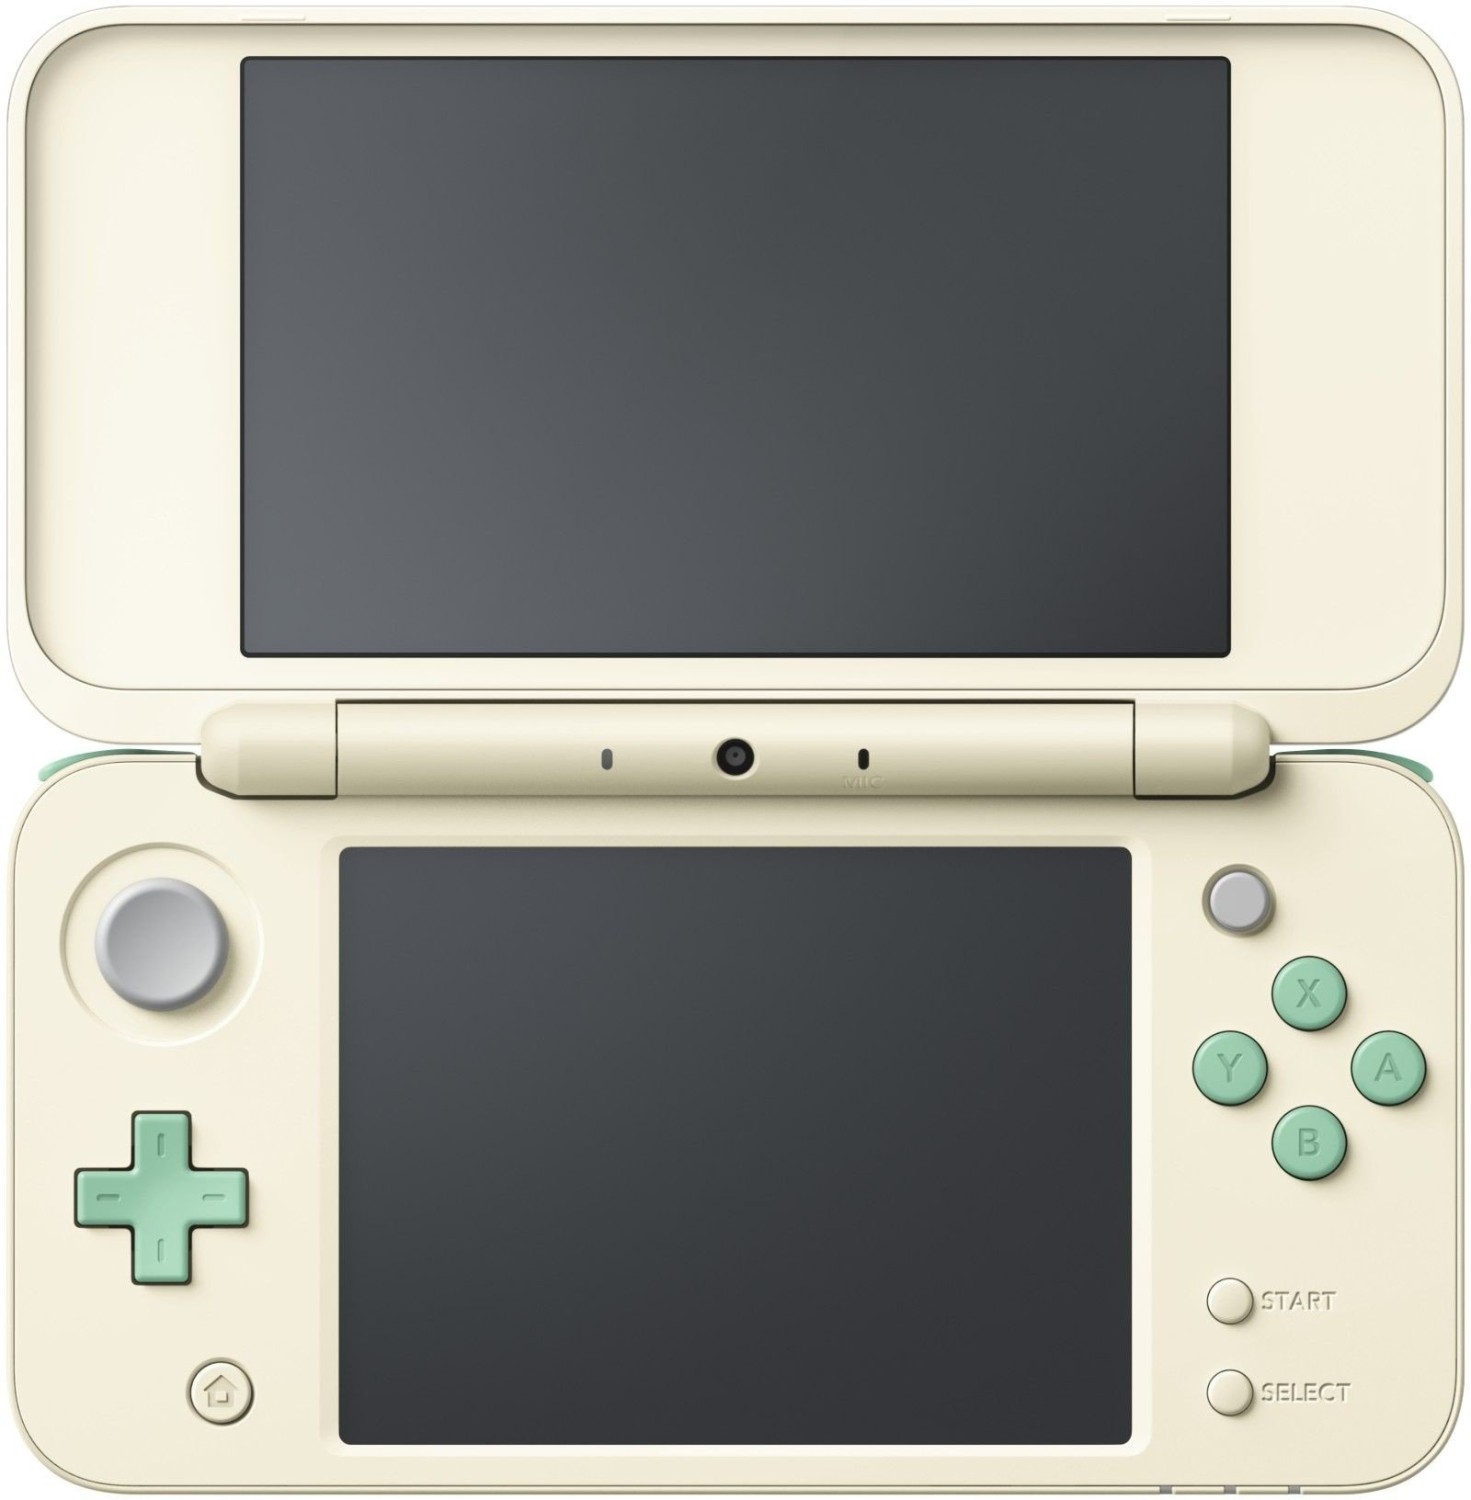 Nintendo New 2DS XL | Now with a 30-Day Trial Period